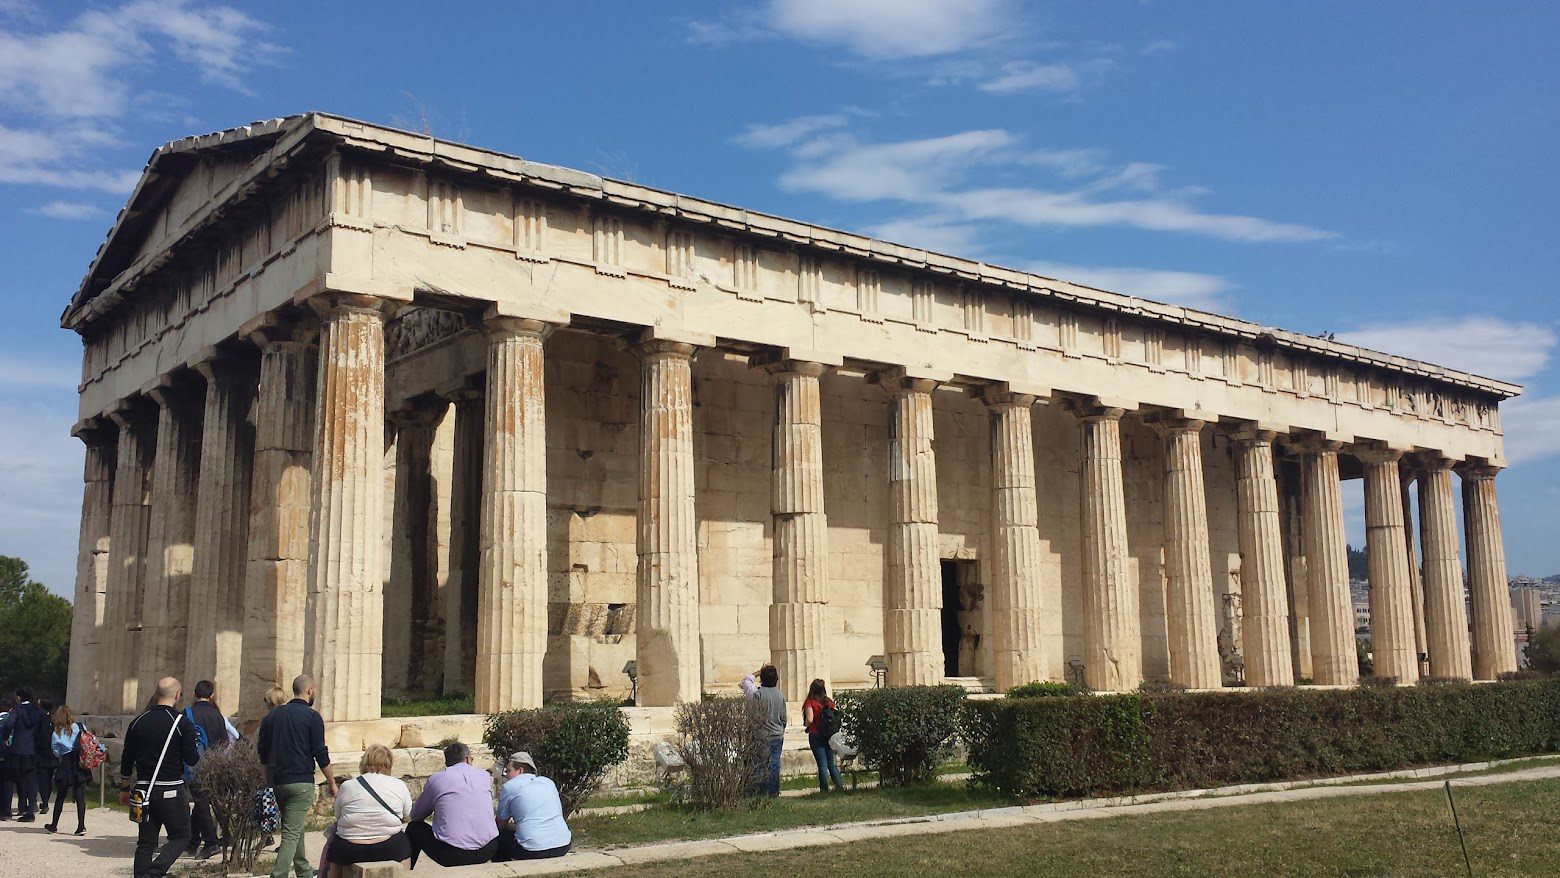 A picture of the temple of Hephaestus taken in spring